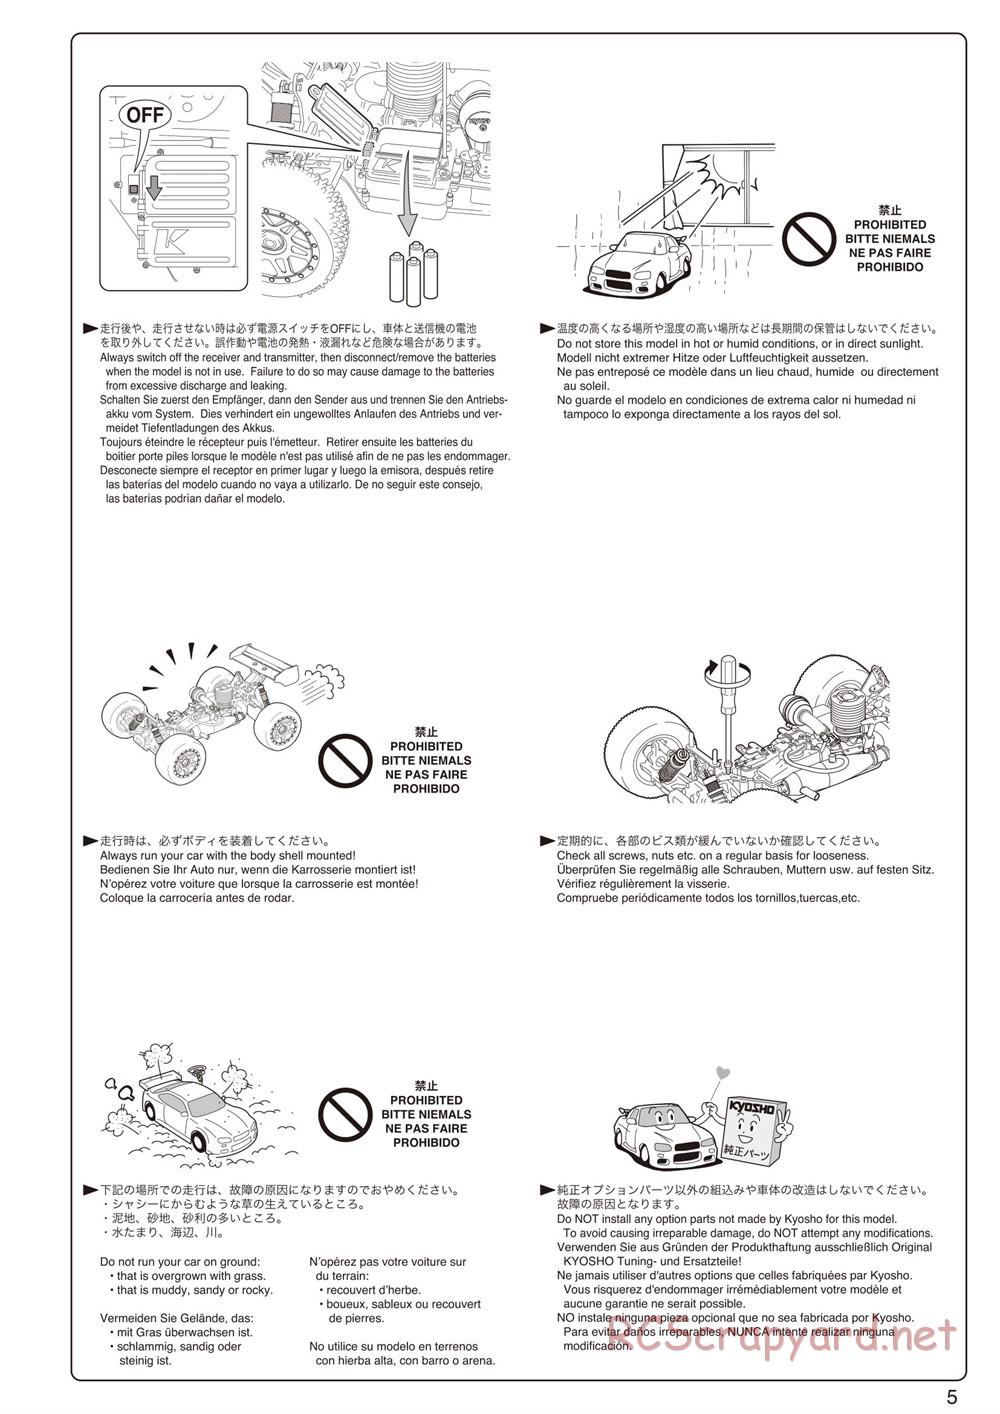 Kyosho - Inferno Neo ST - Manual - Page 5